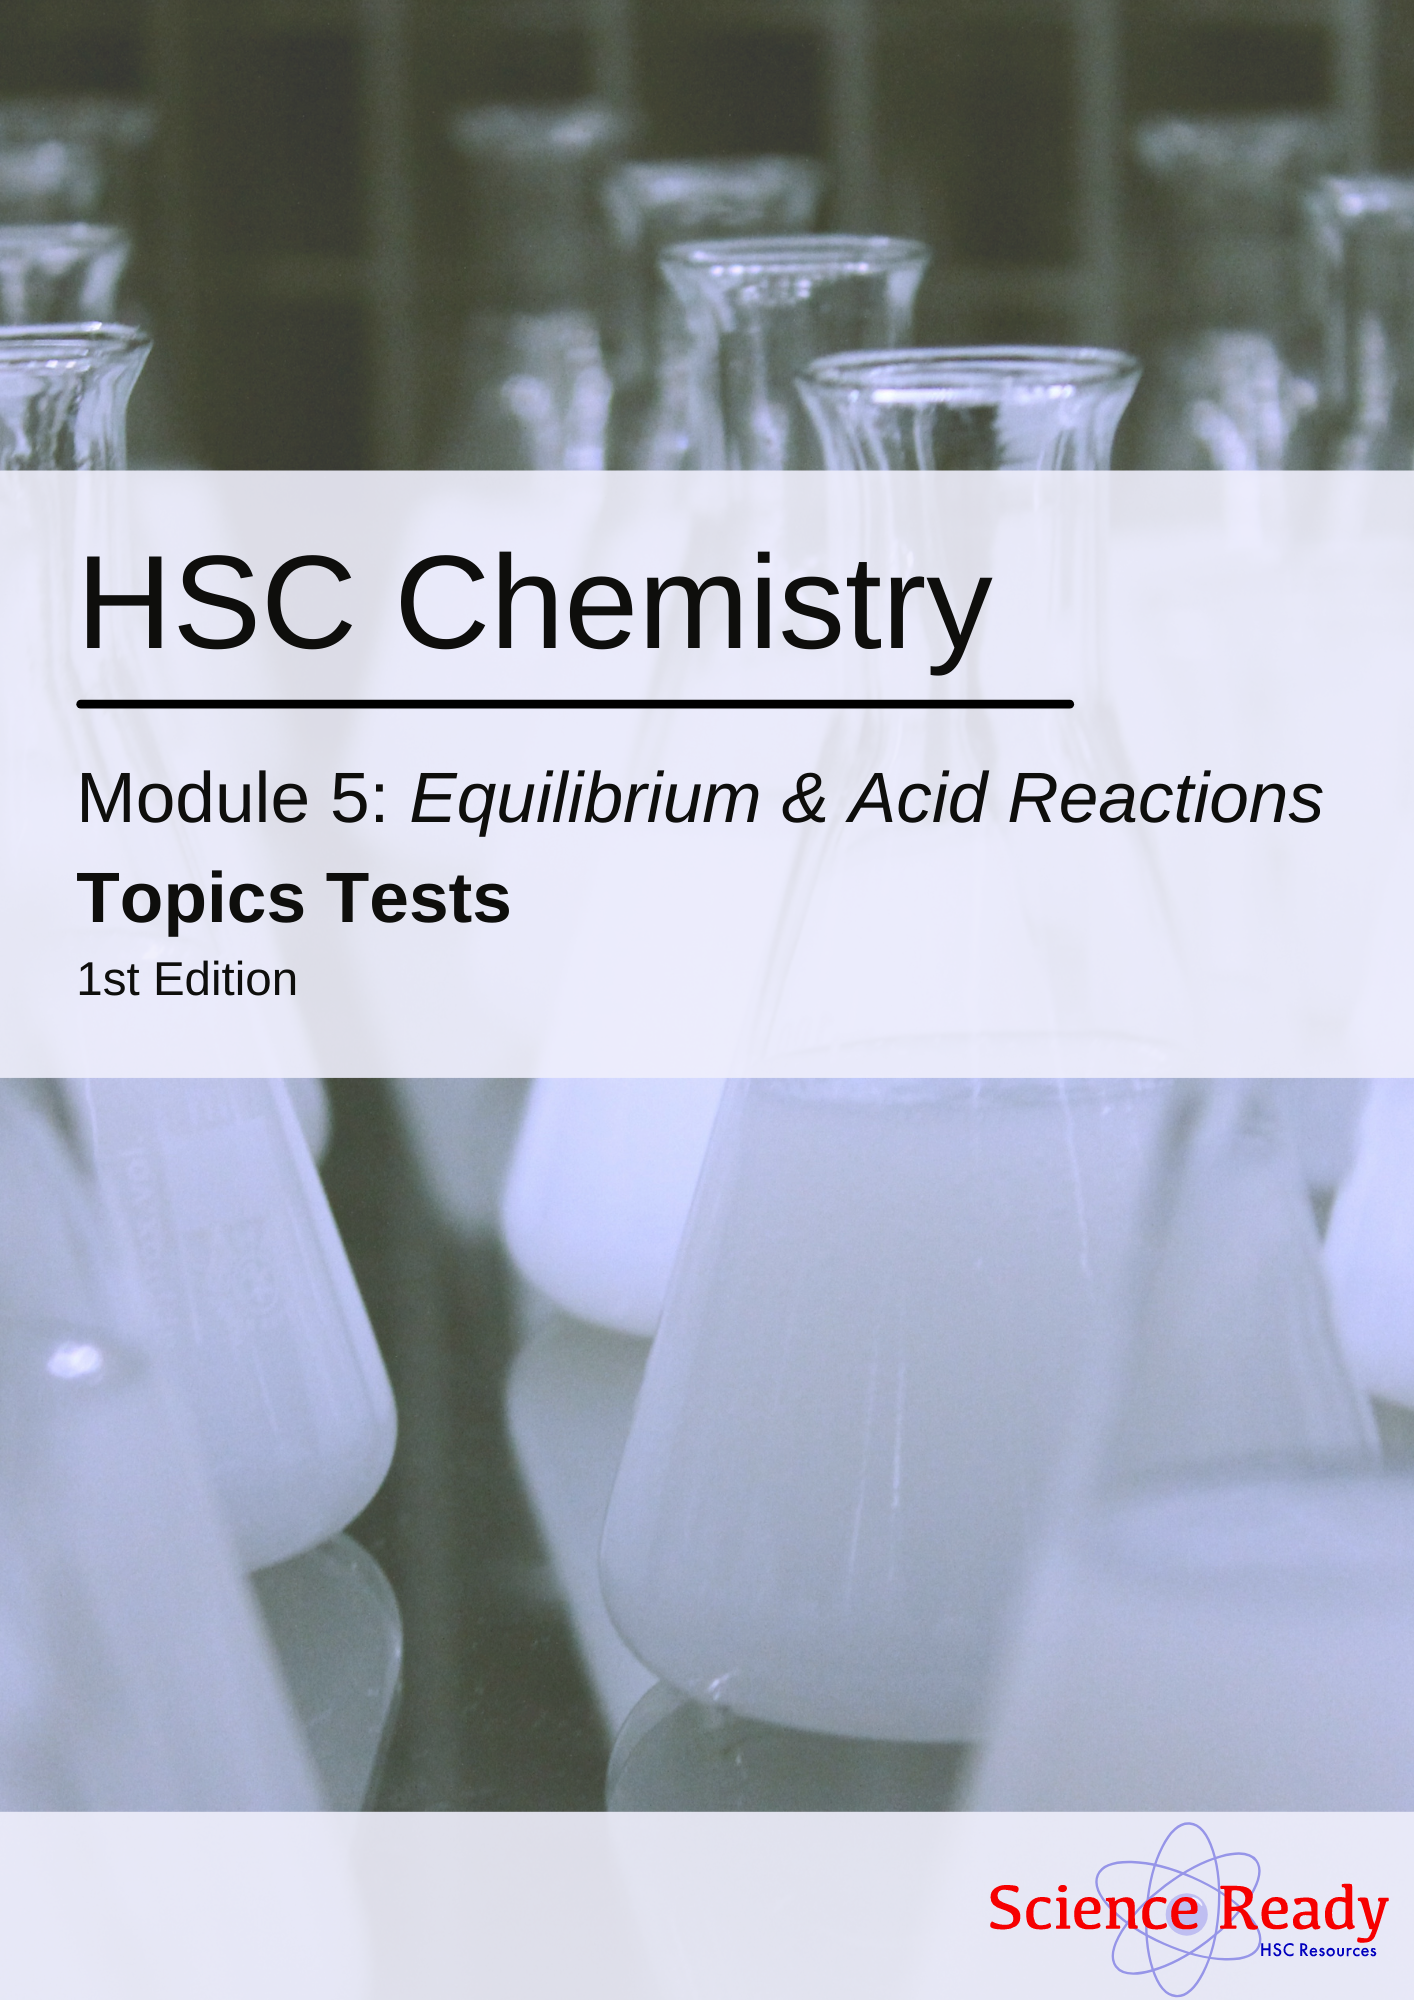 HSC Chemistry Module 5: Equilibrium and Acid Reactions Topic Tests